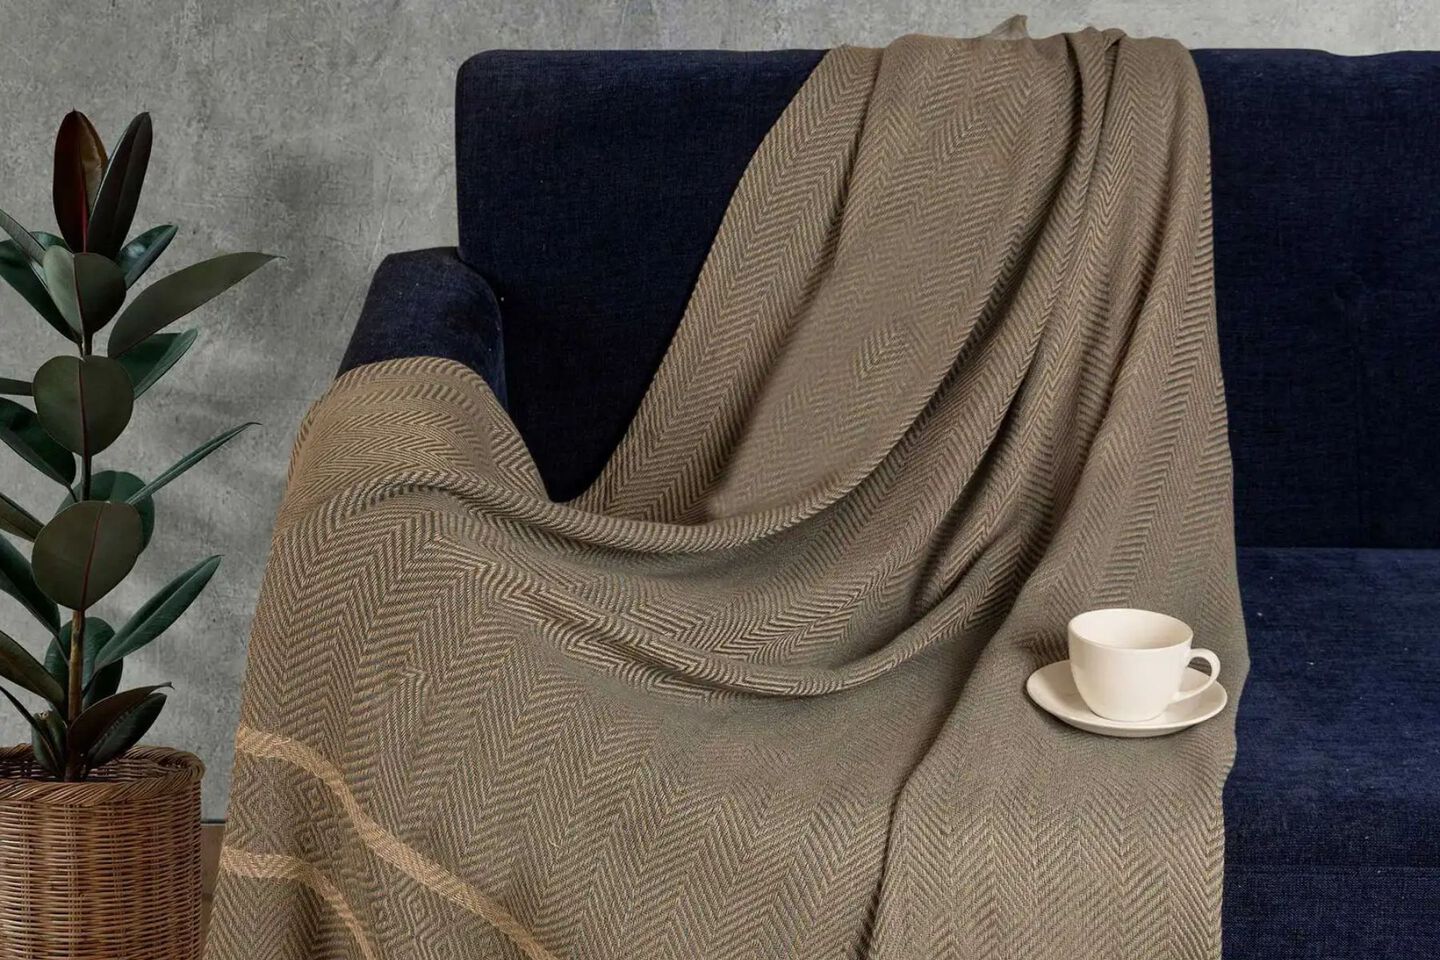 Dark blue couch with a brown blanket and tea cup sitting on top